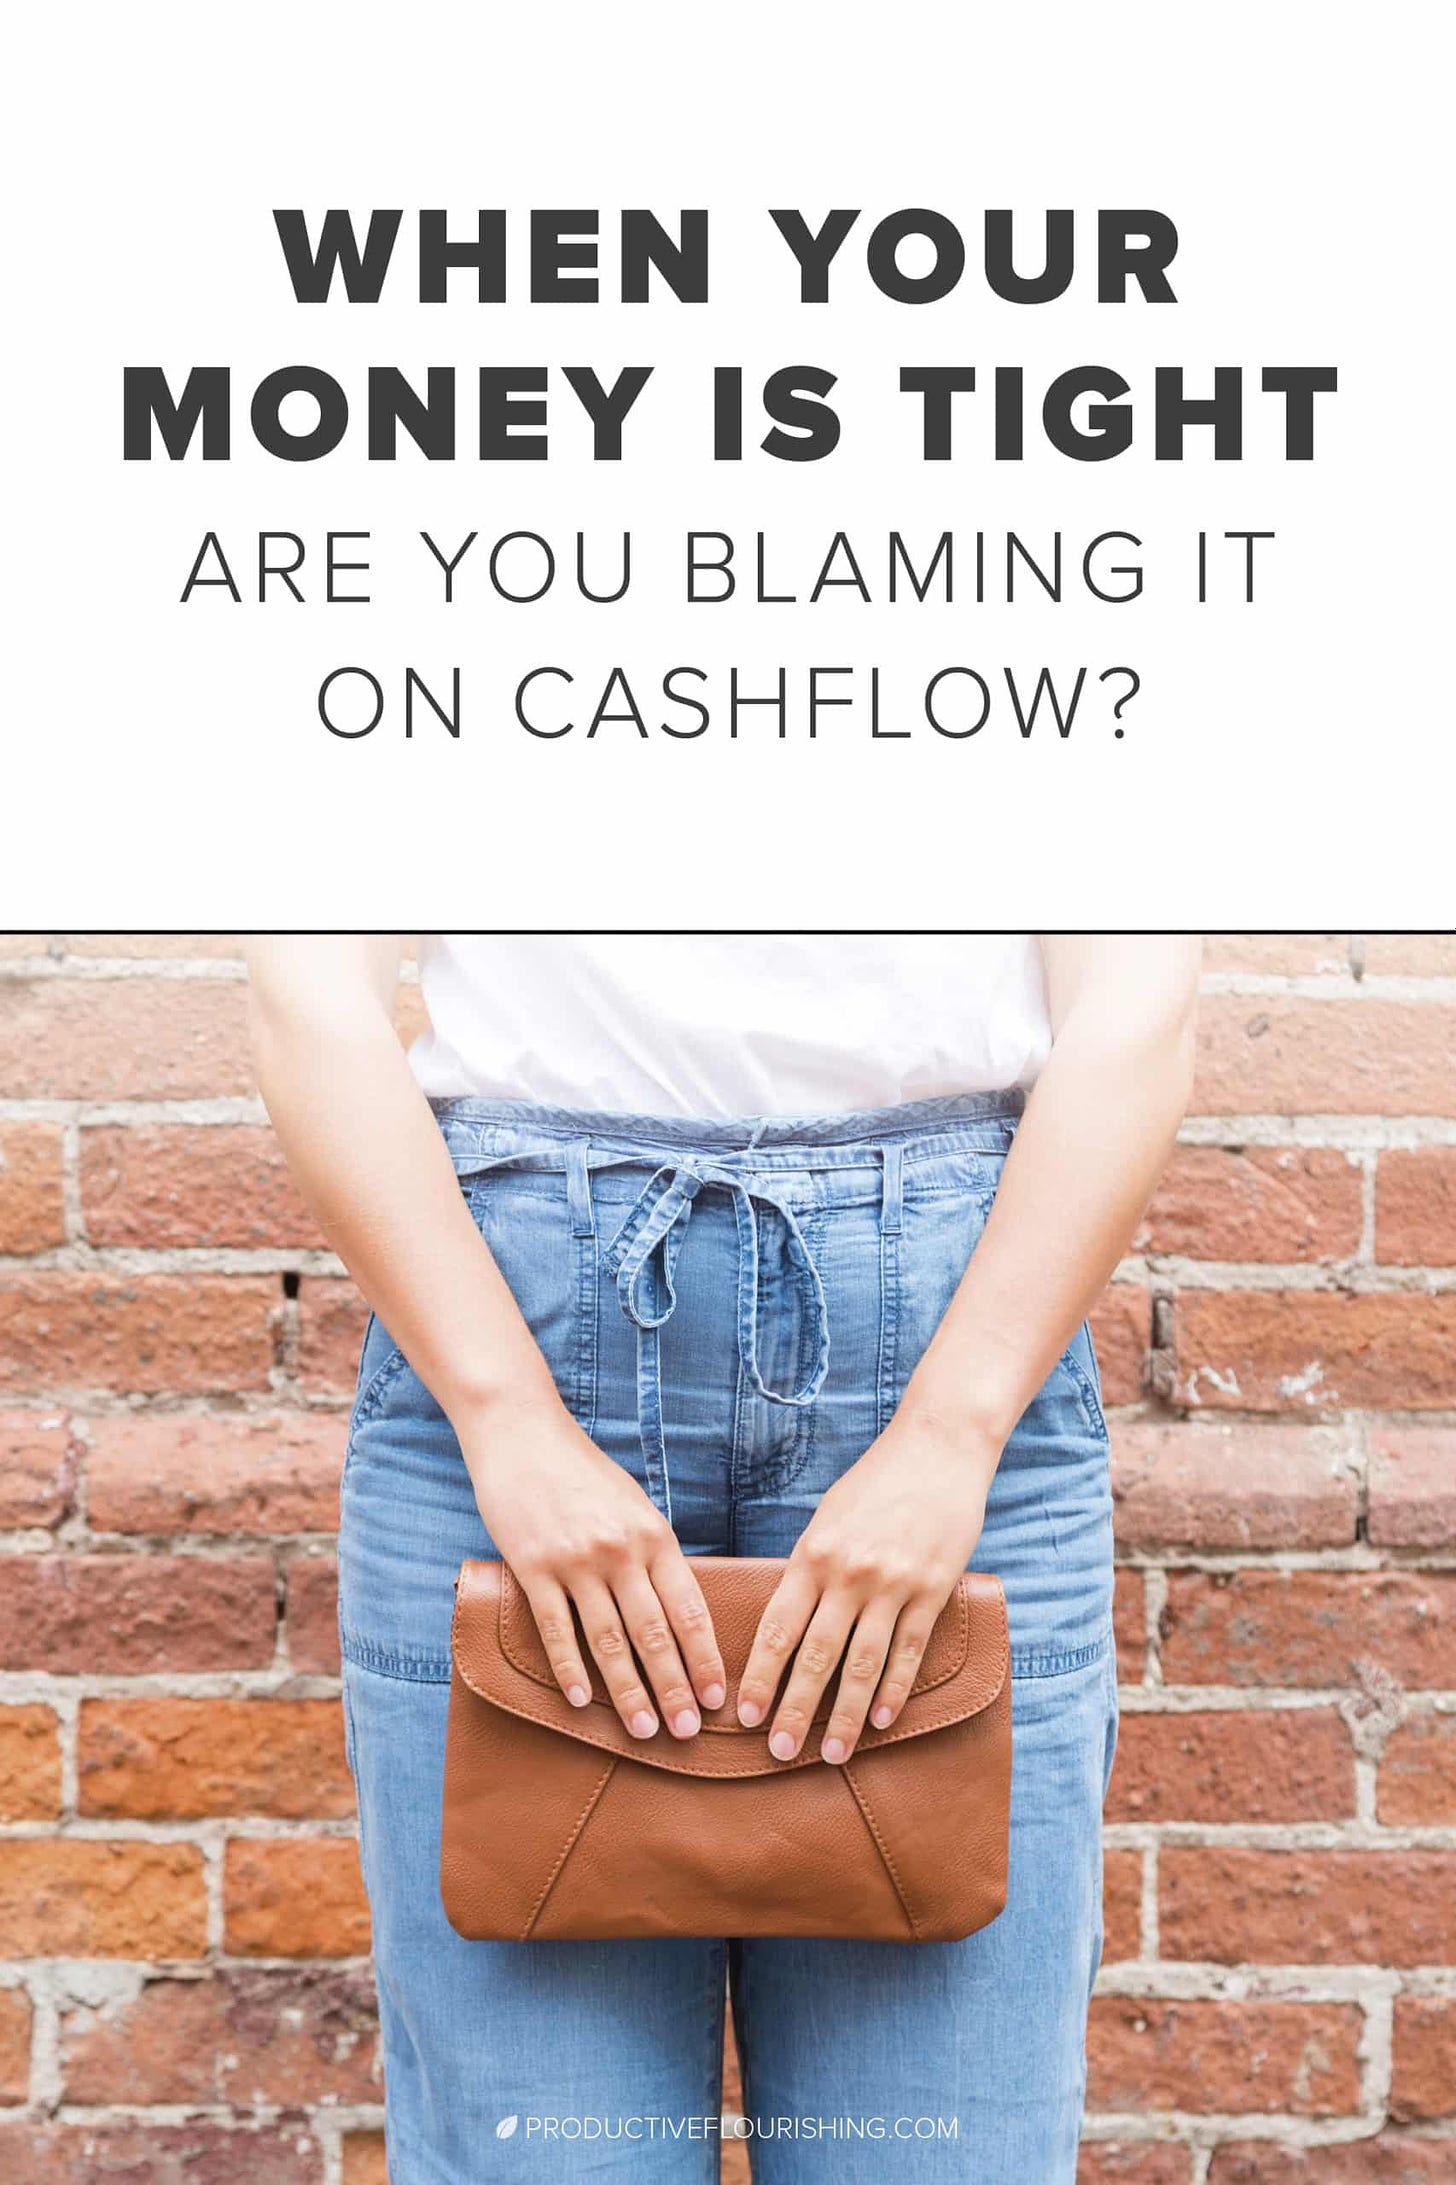 When Your Money is Tight, Are You Blaming It On Cashflow? This post isn’t about quitting, nor is it about those instances when the most dire outcome is shutting down or declaring bankruptcy. It is about viewing those seasons when money becomes a bottleneck as good things. How to get to the root of your financial woes, and why it's not always about cashflow. #cashflowissues #businessfinances #productiveflourishing